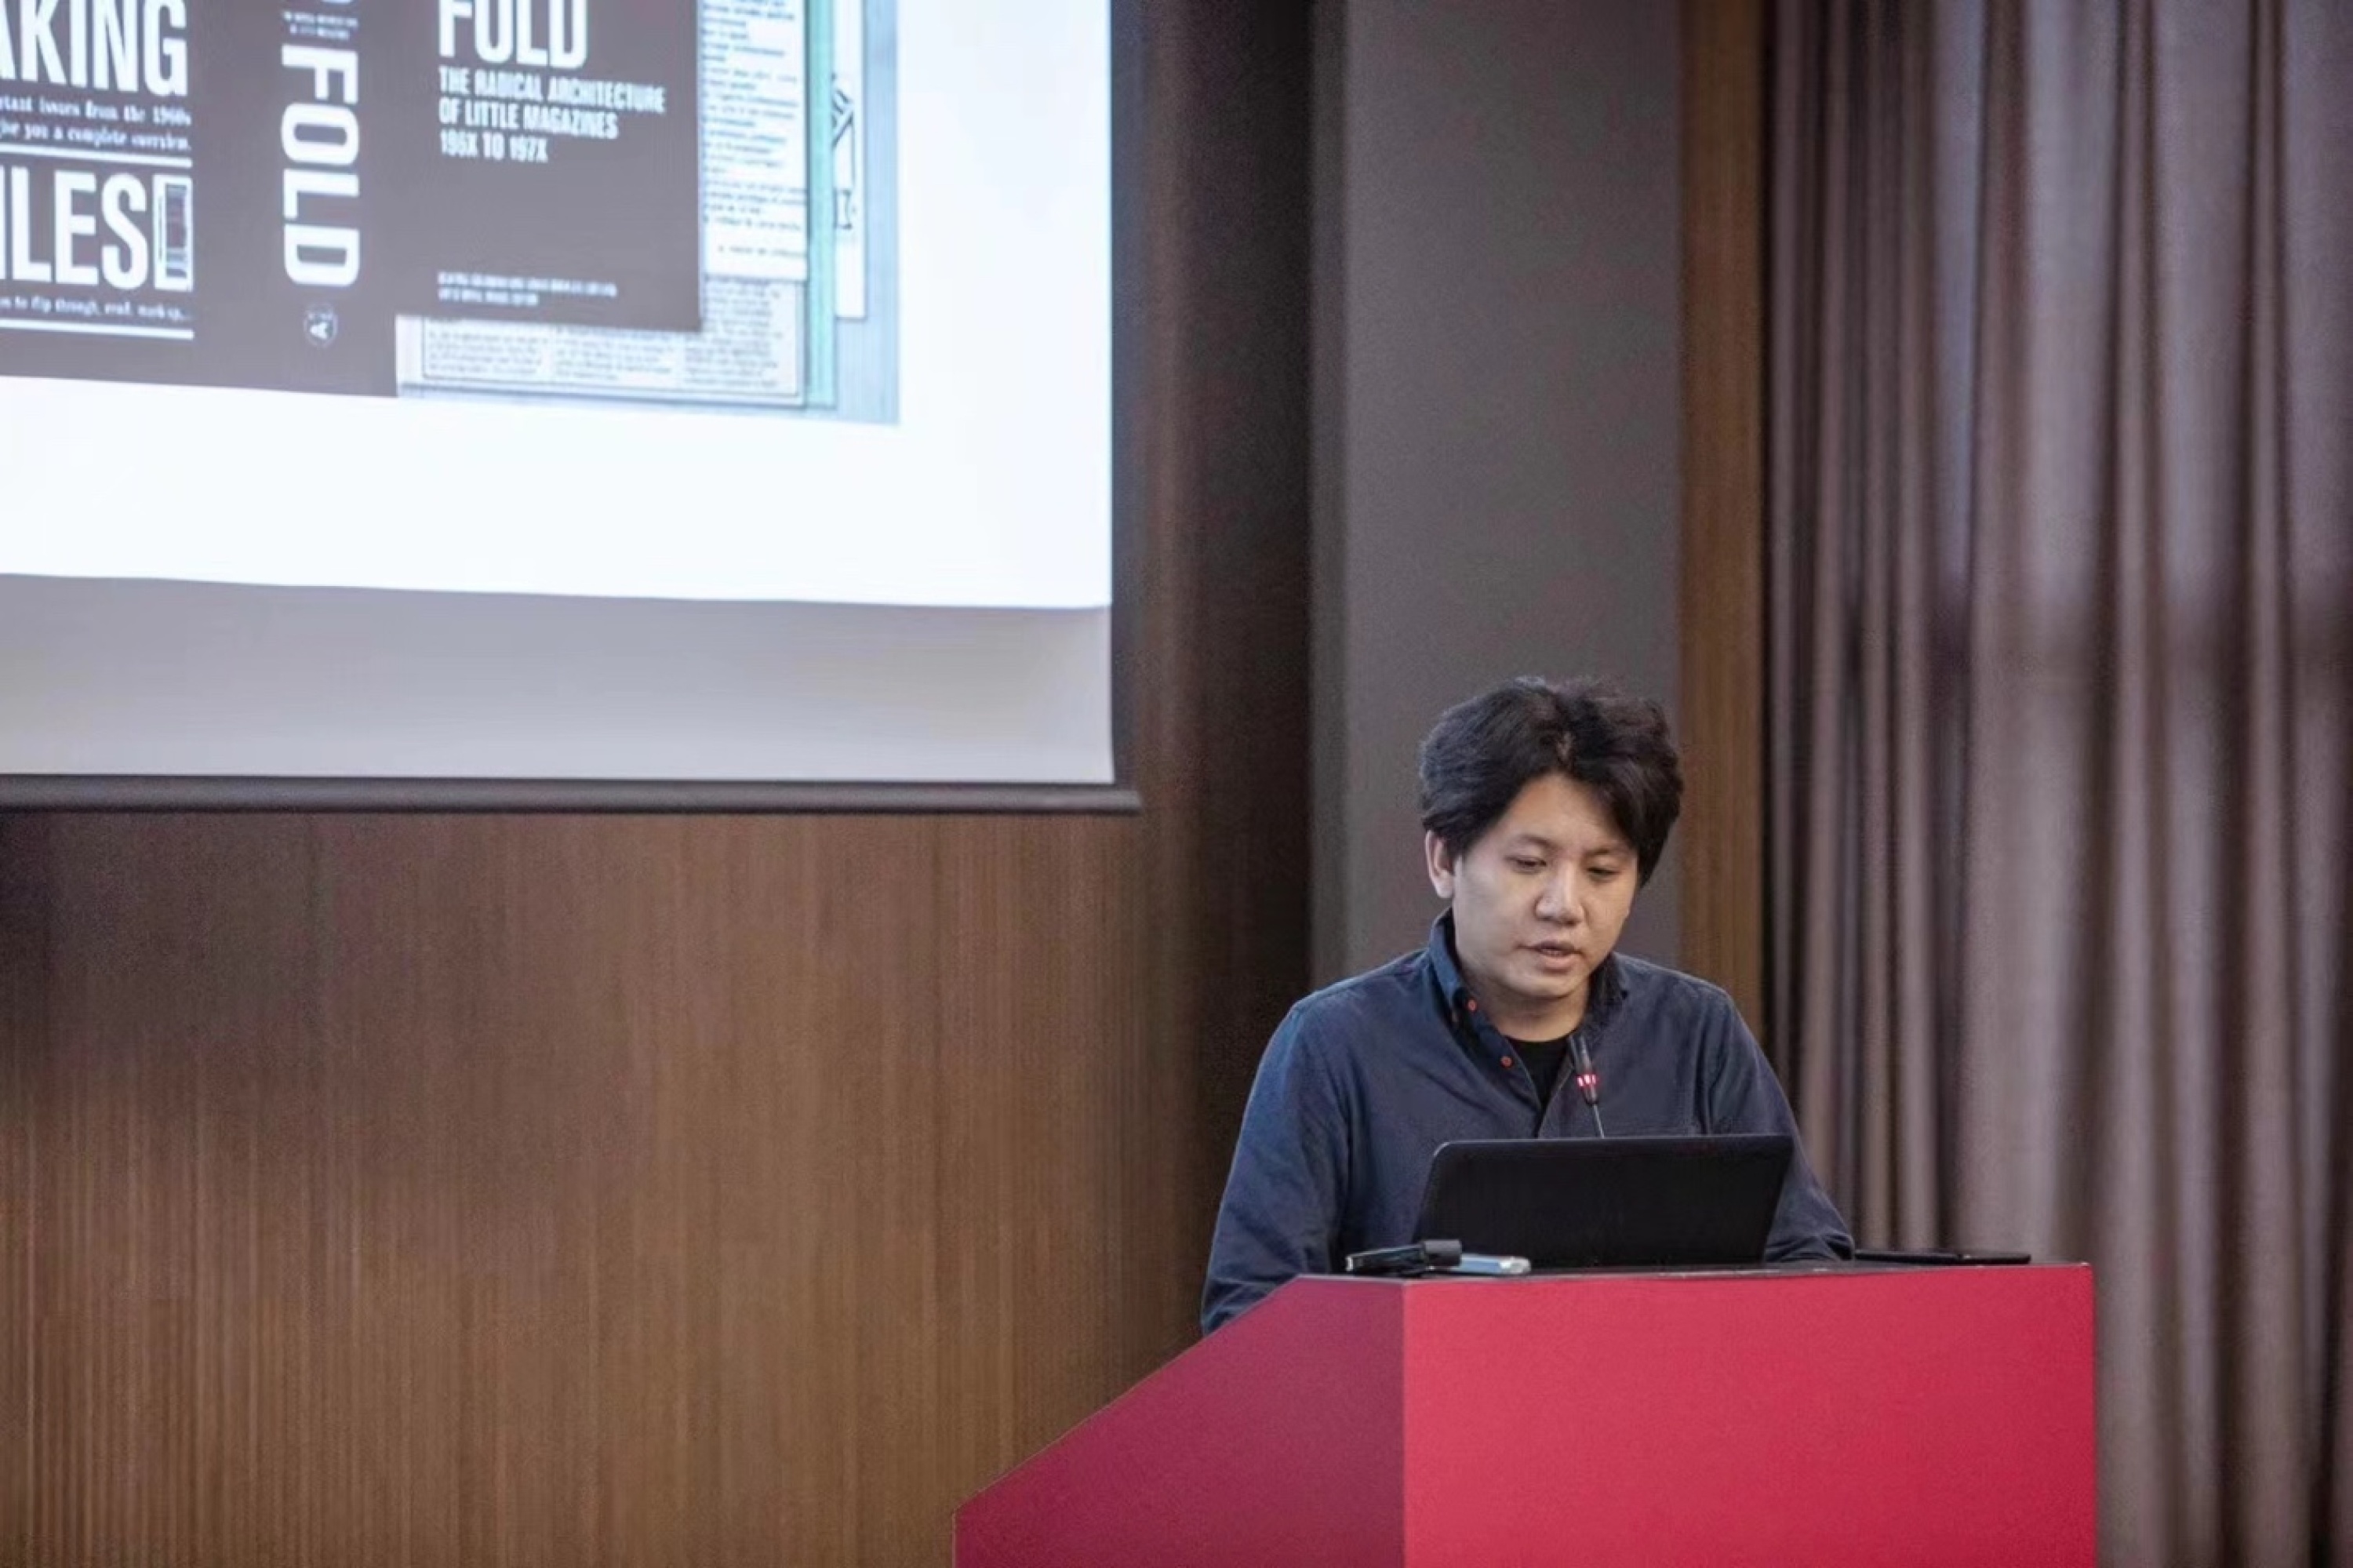 Zigeng Wang Attended and Delivered a Speech at the “Post Bauhaus” Academic Seminar, Invited by Mosen Mostafavi, Dean of the Graduate School of Design at Harvard University